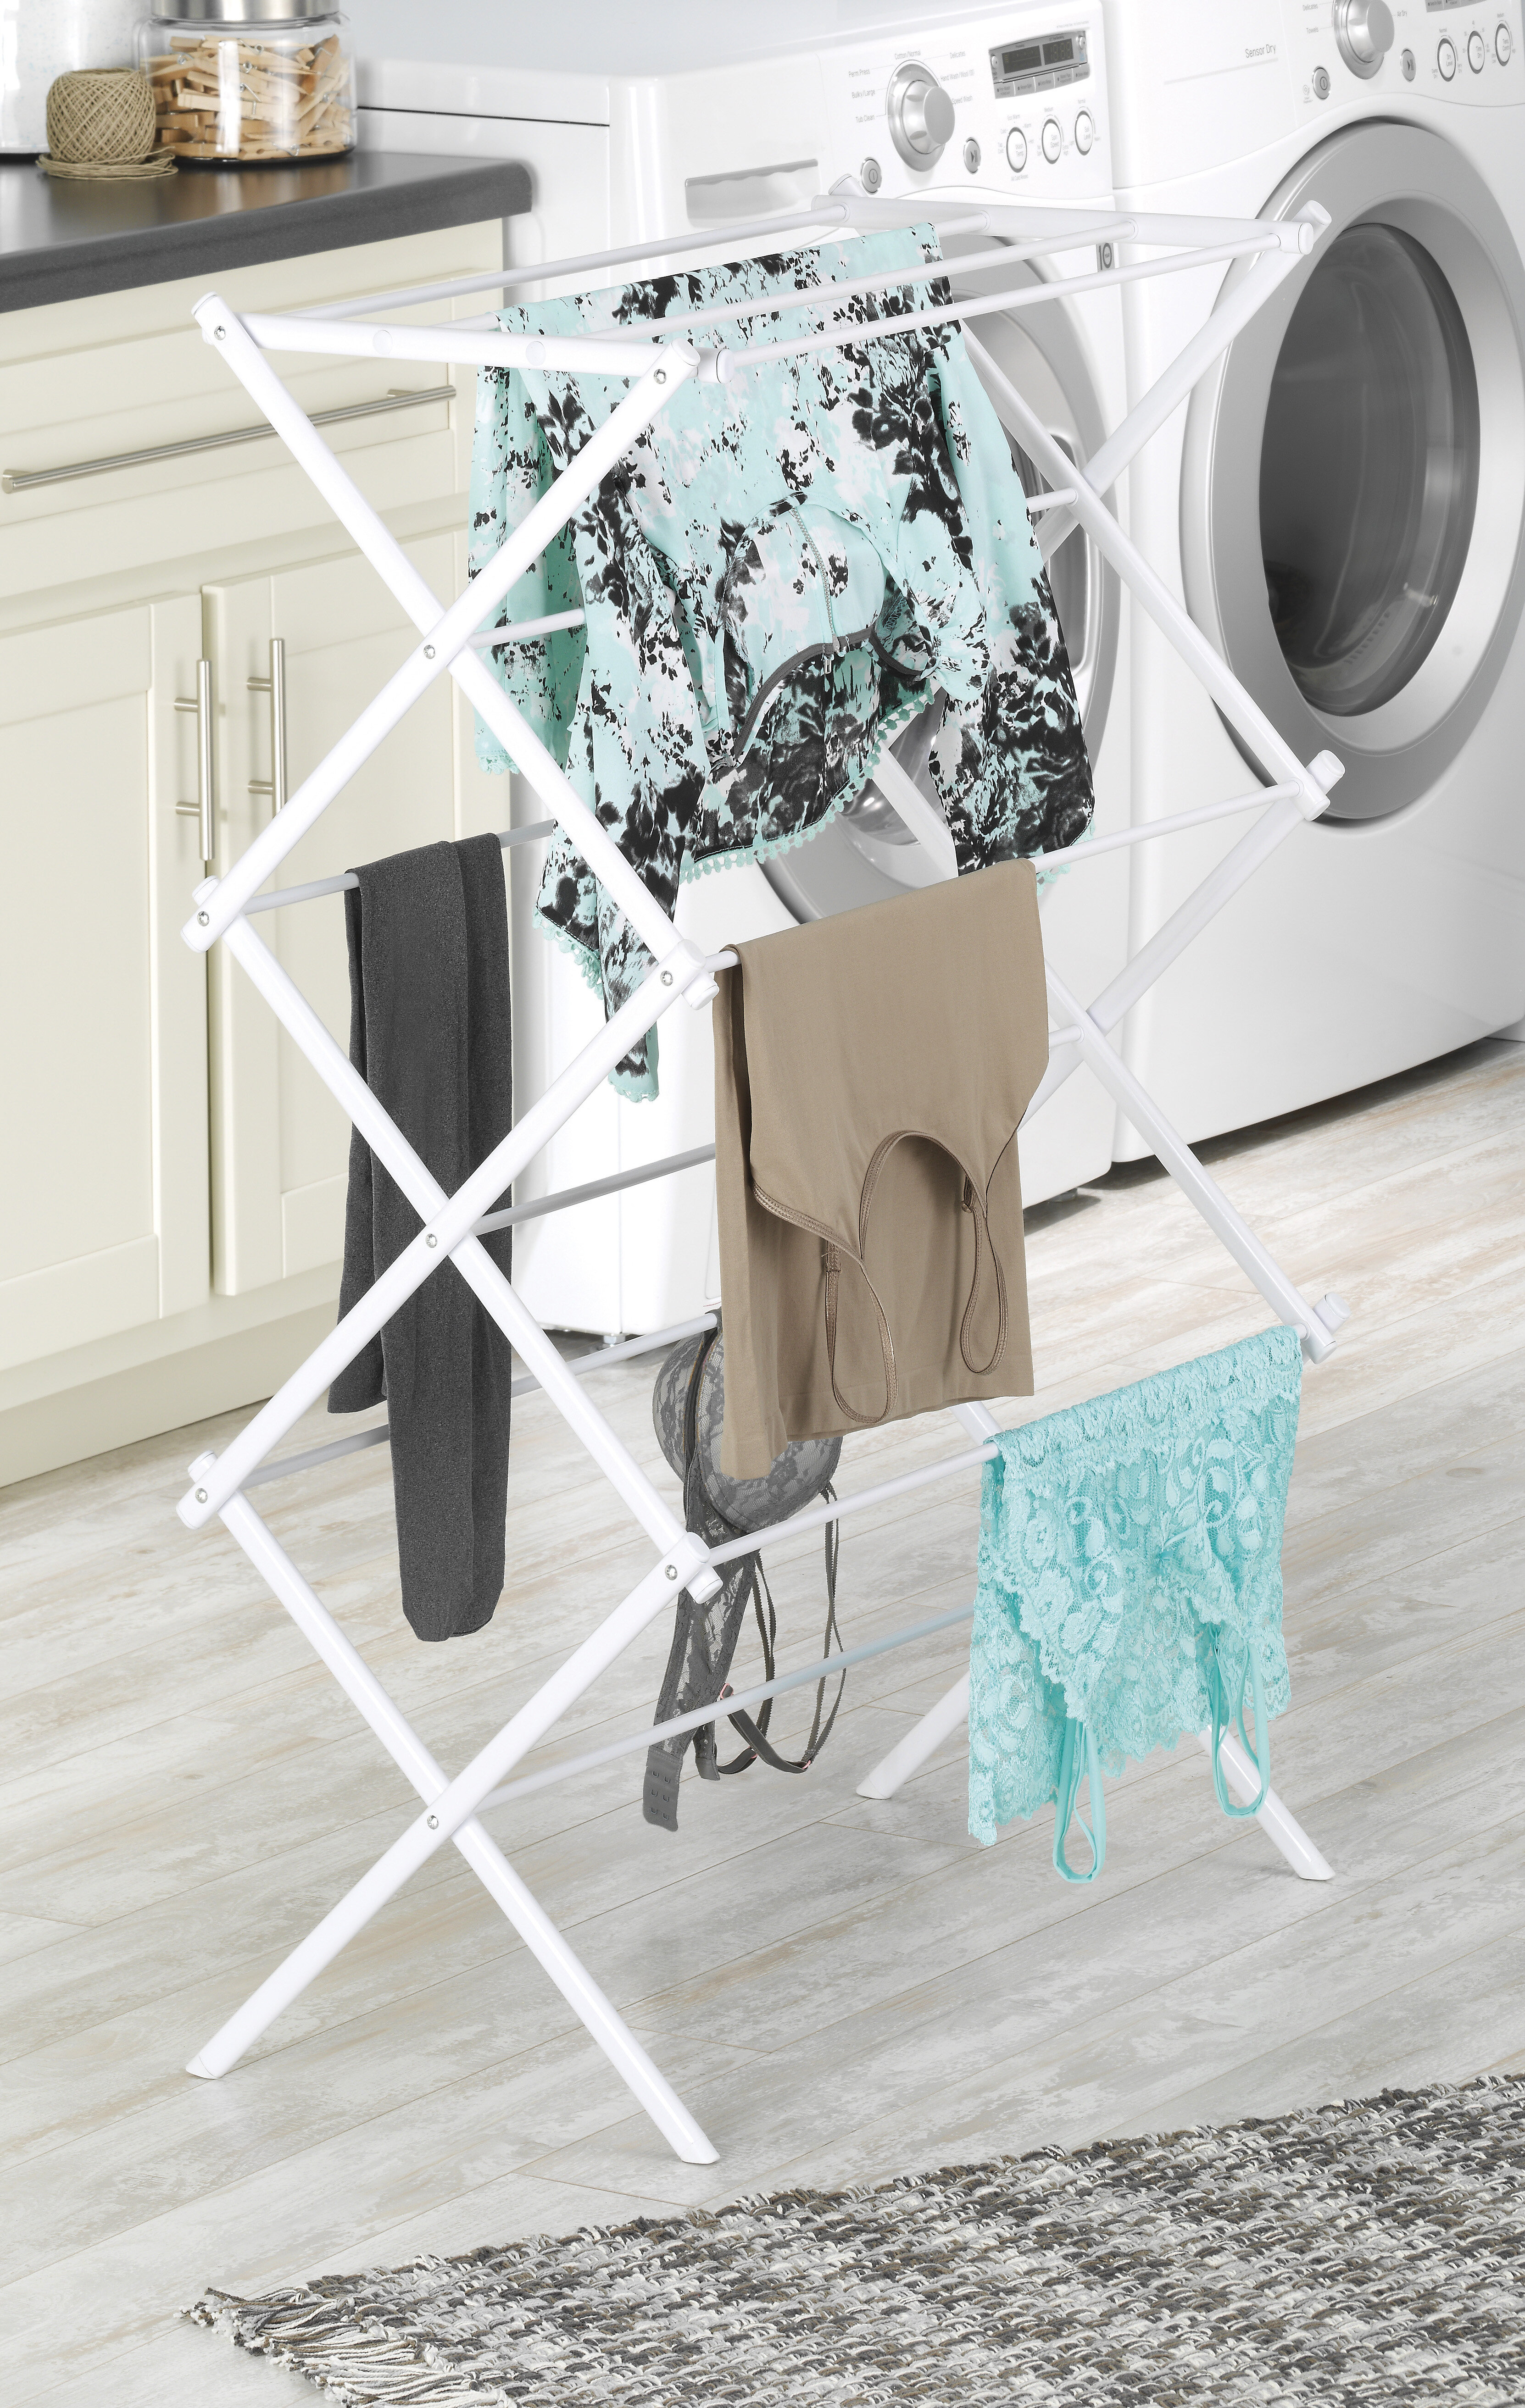 Details about   Whitmor Expandable Drying Rack 